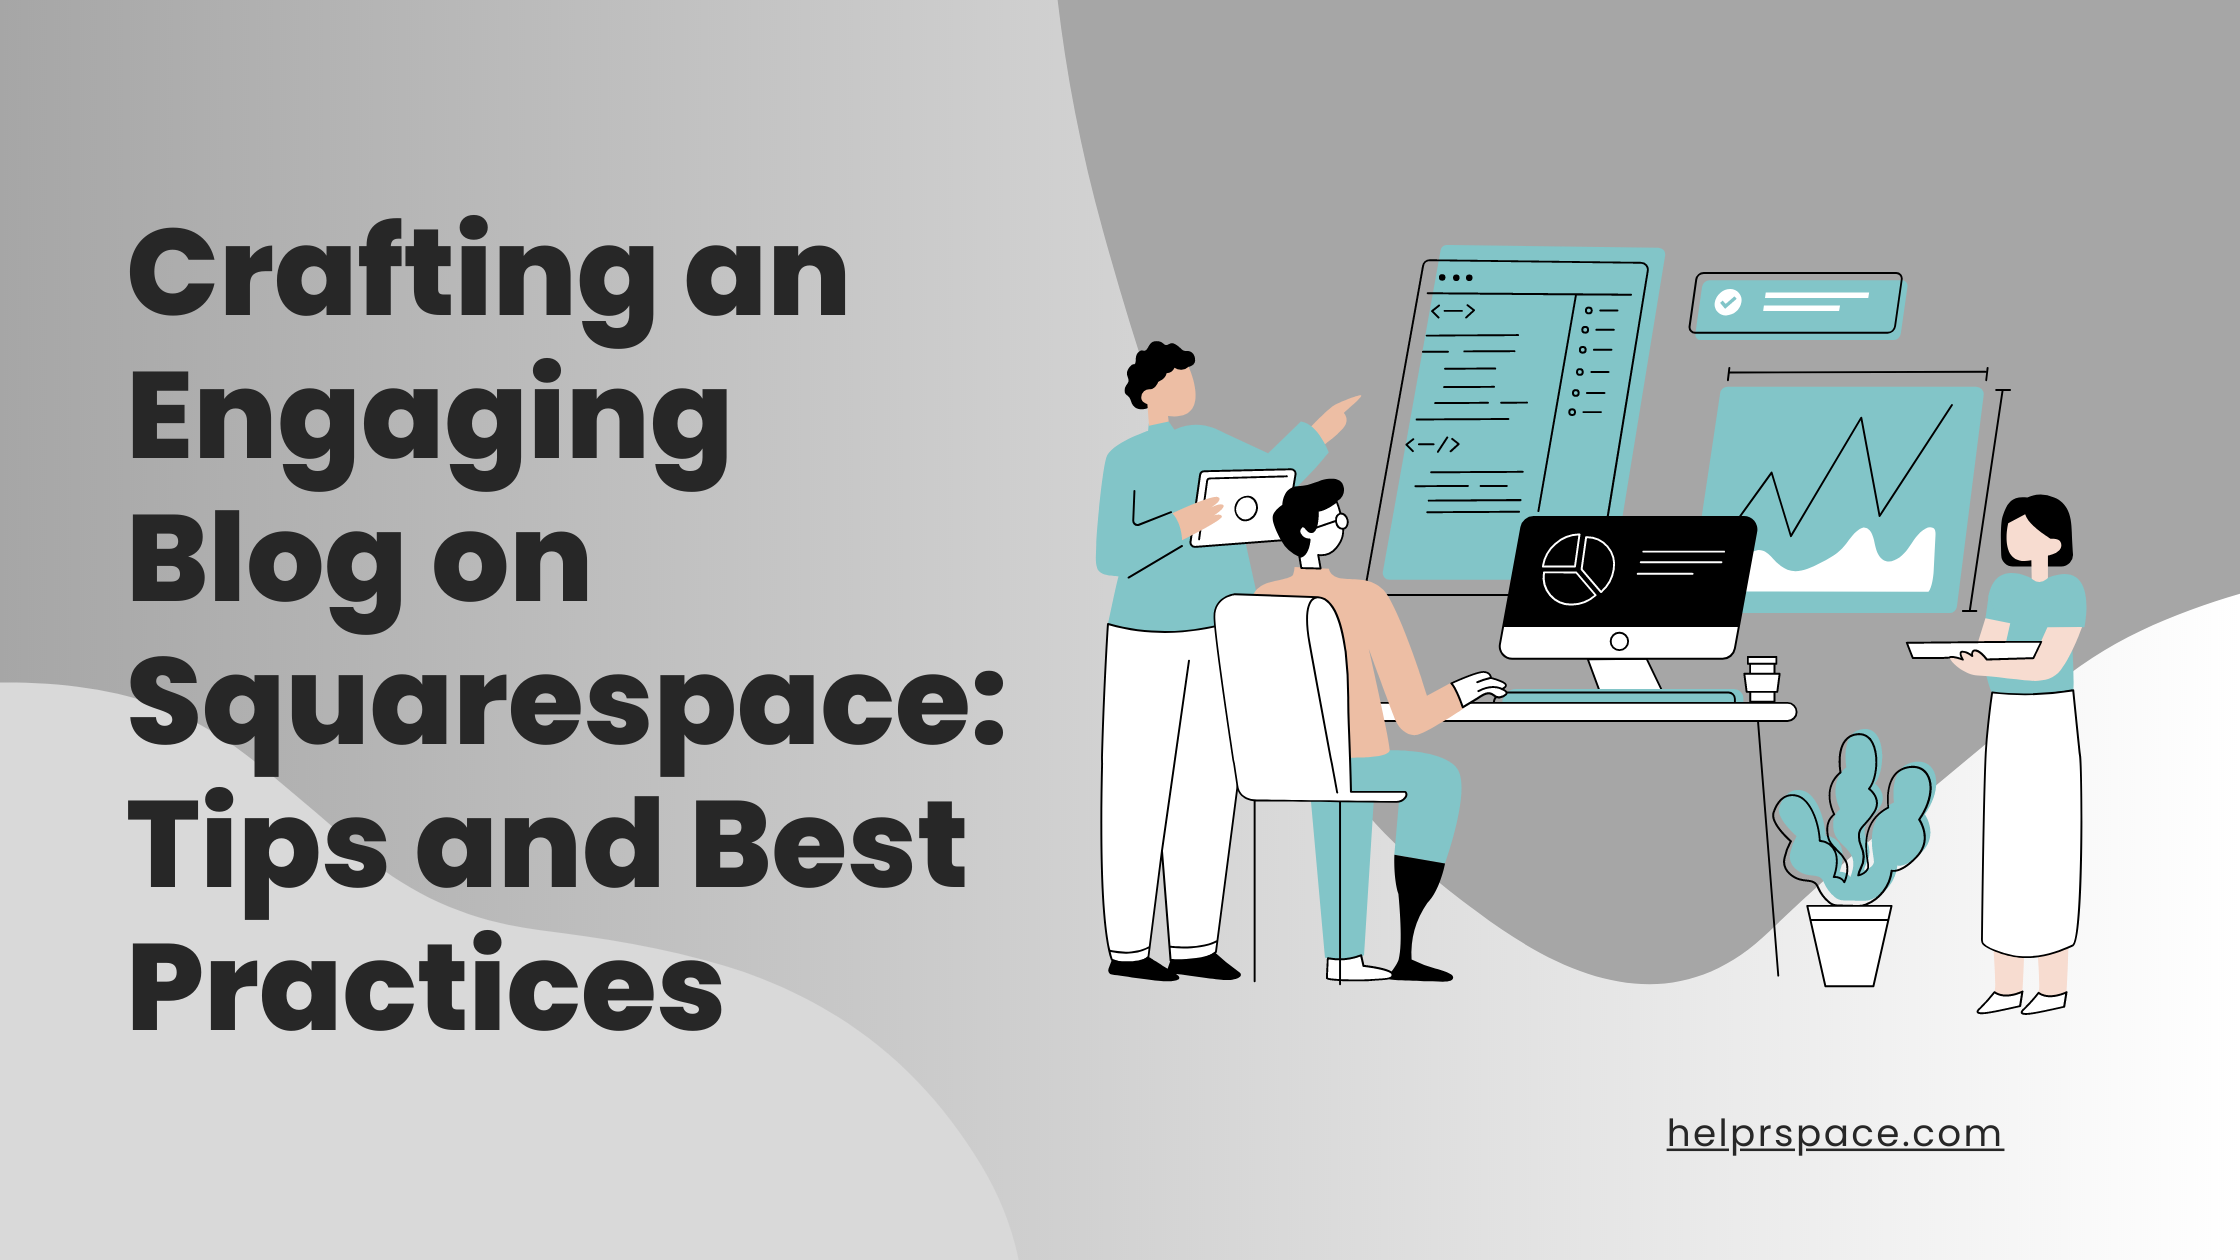 Crafting an Engaging Blog on Squarespace: Tips and Best Practices